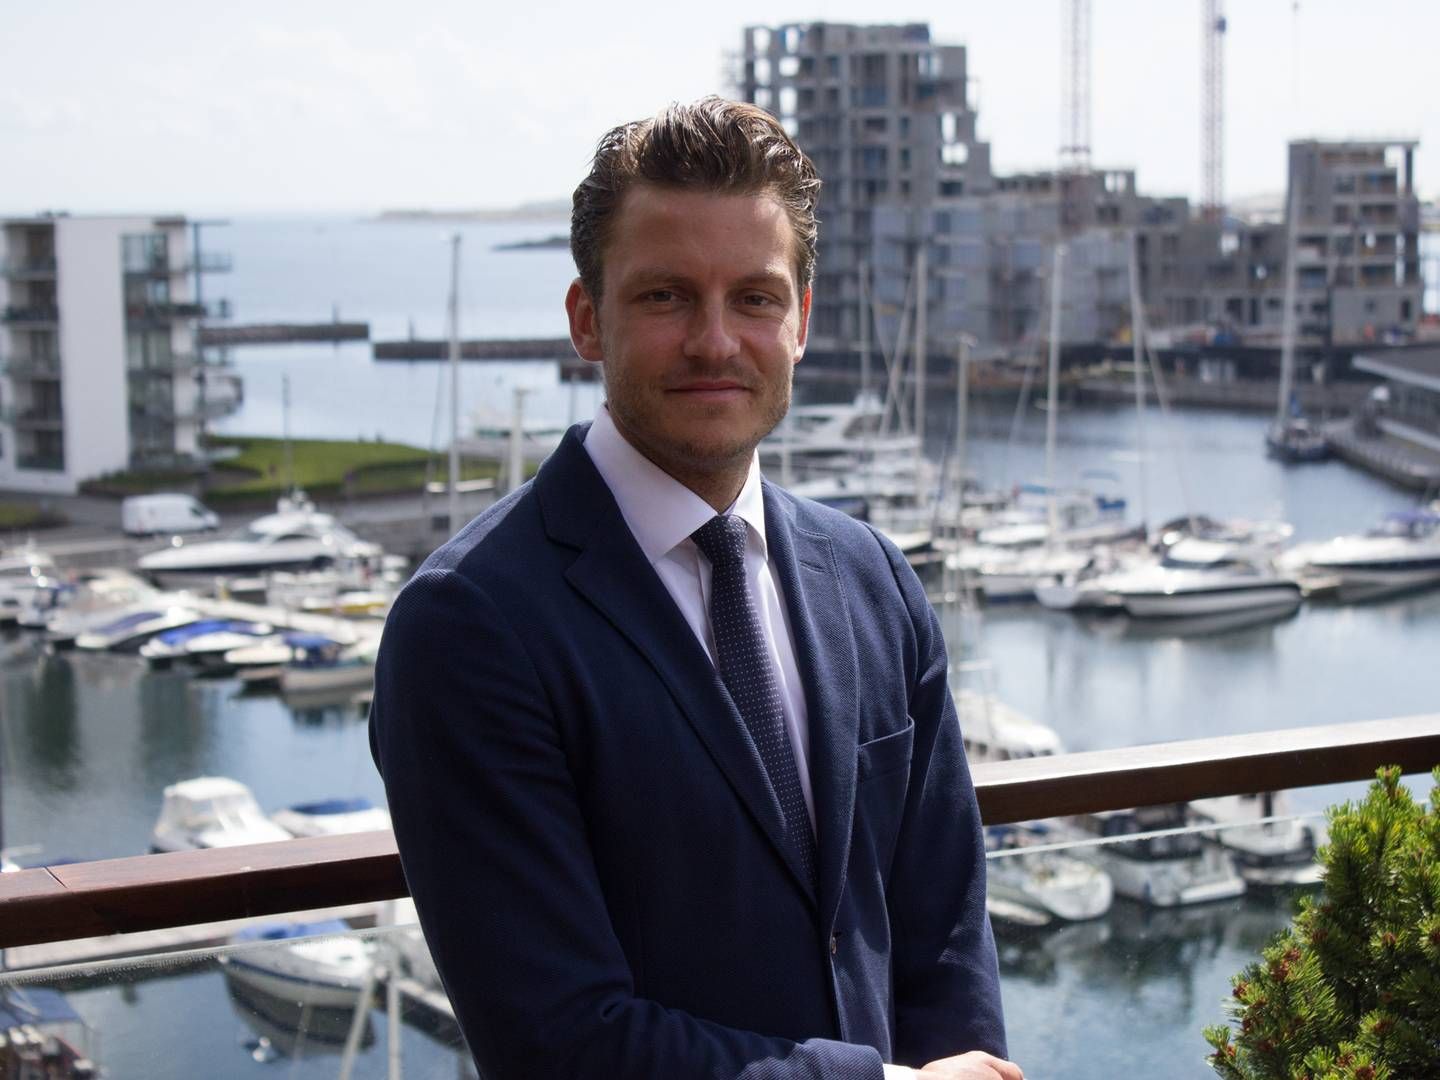 Last year, Lightship Chartering and CEO Sune Fladberg initiated a substantial growth plan. | Photo: Shippingwatch/ Søren Pico